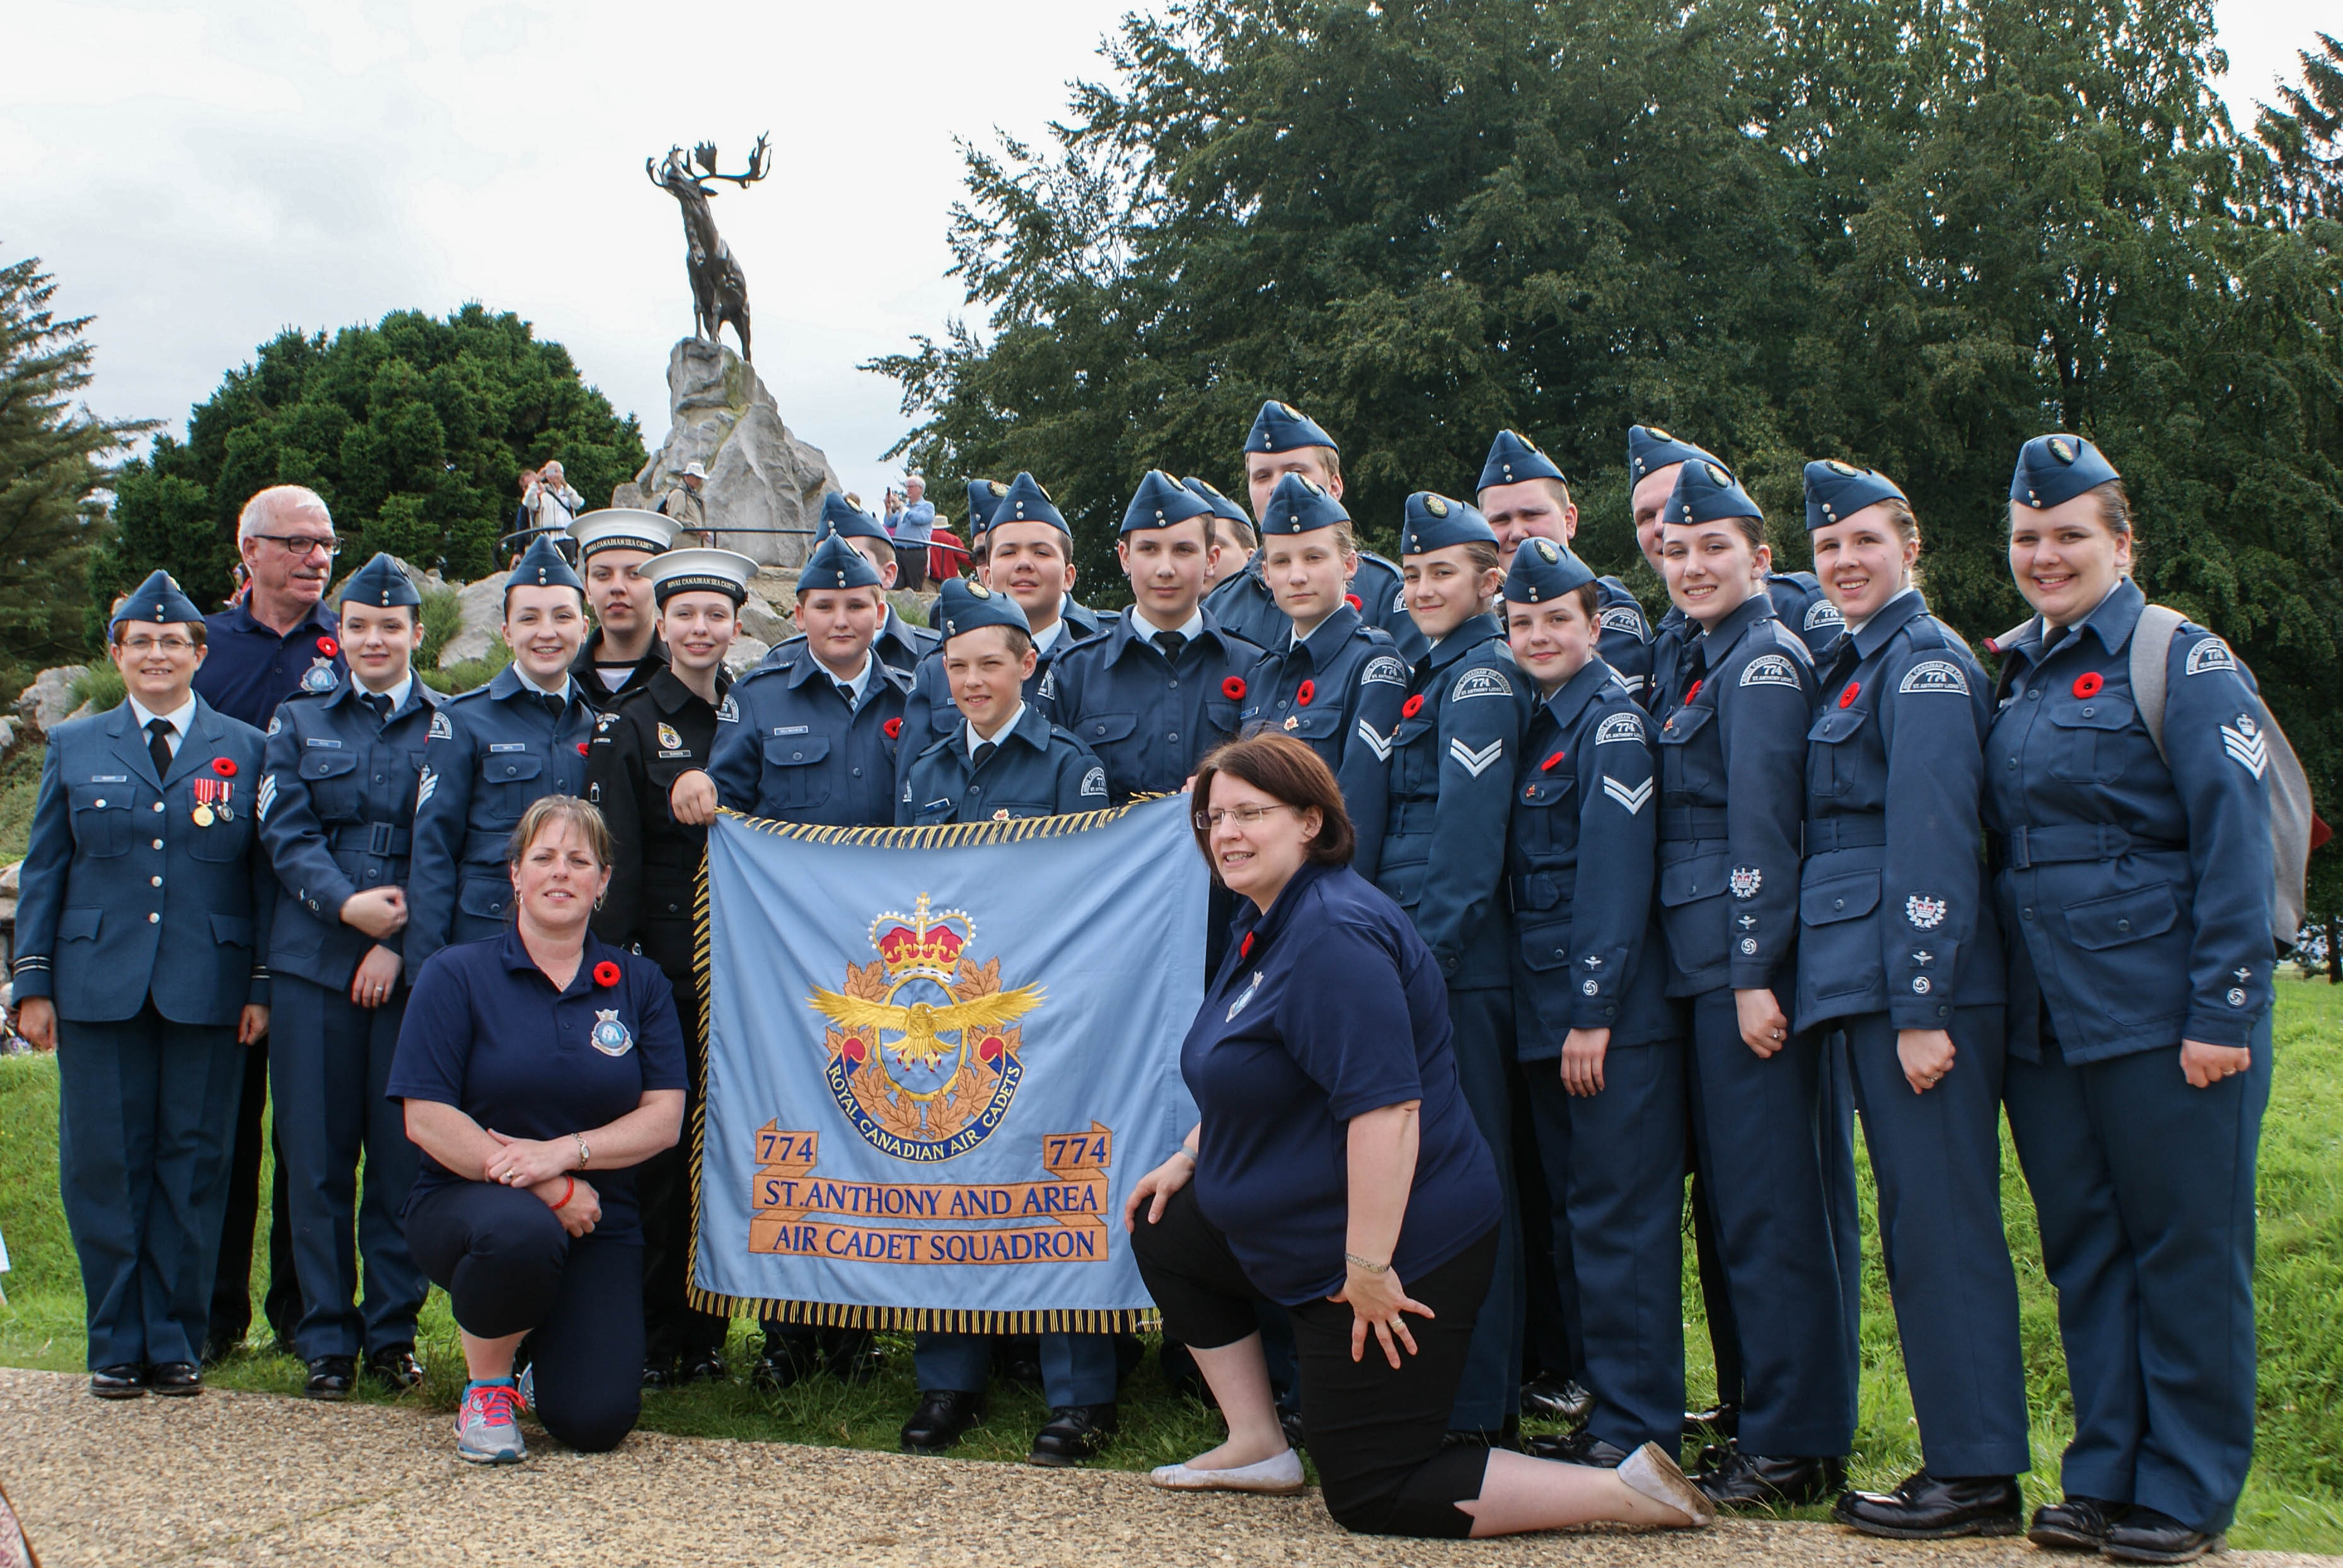 774 St. Anthony and Area Air Cadet Squadron